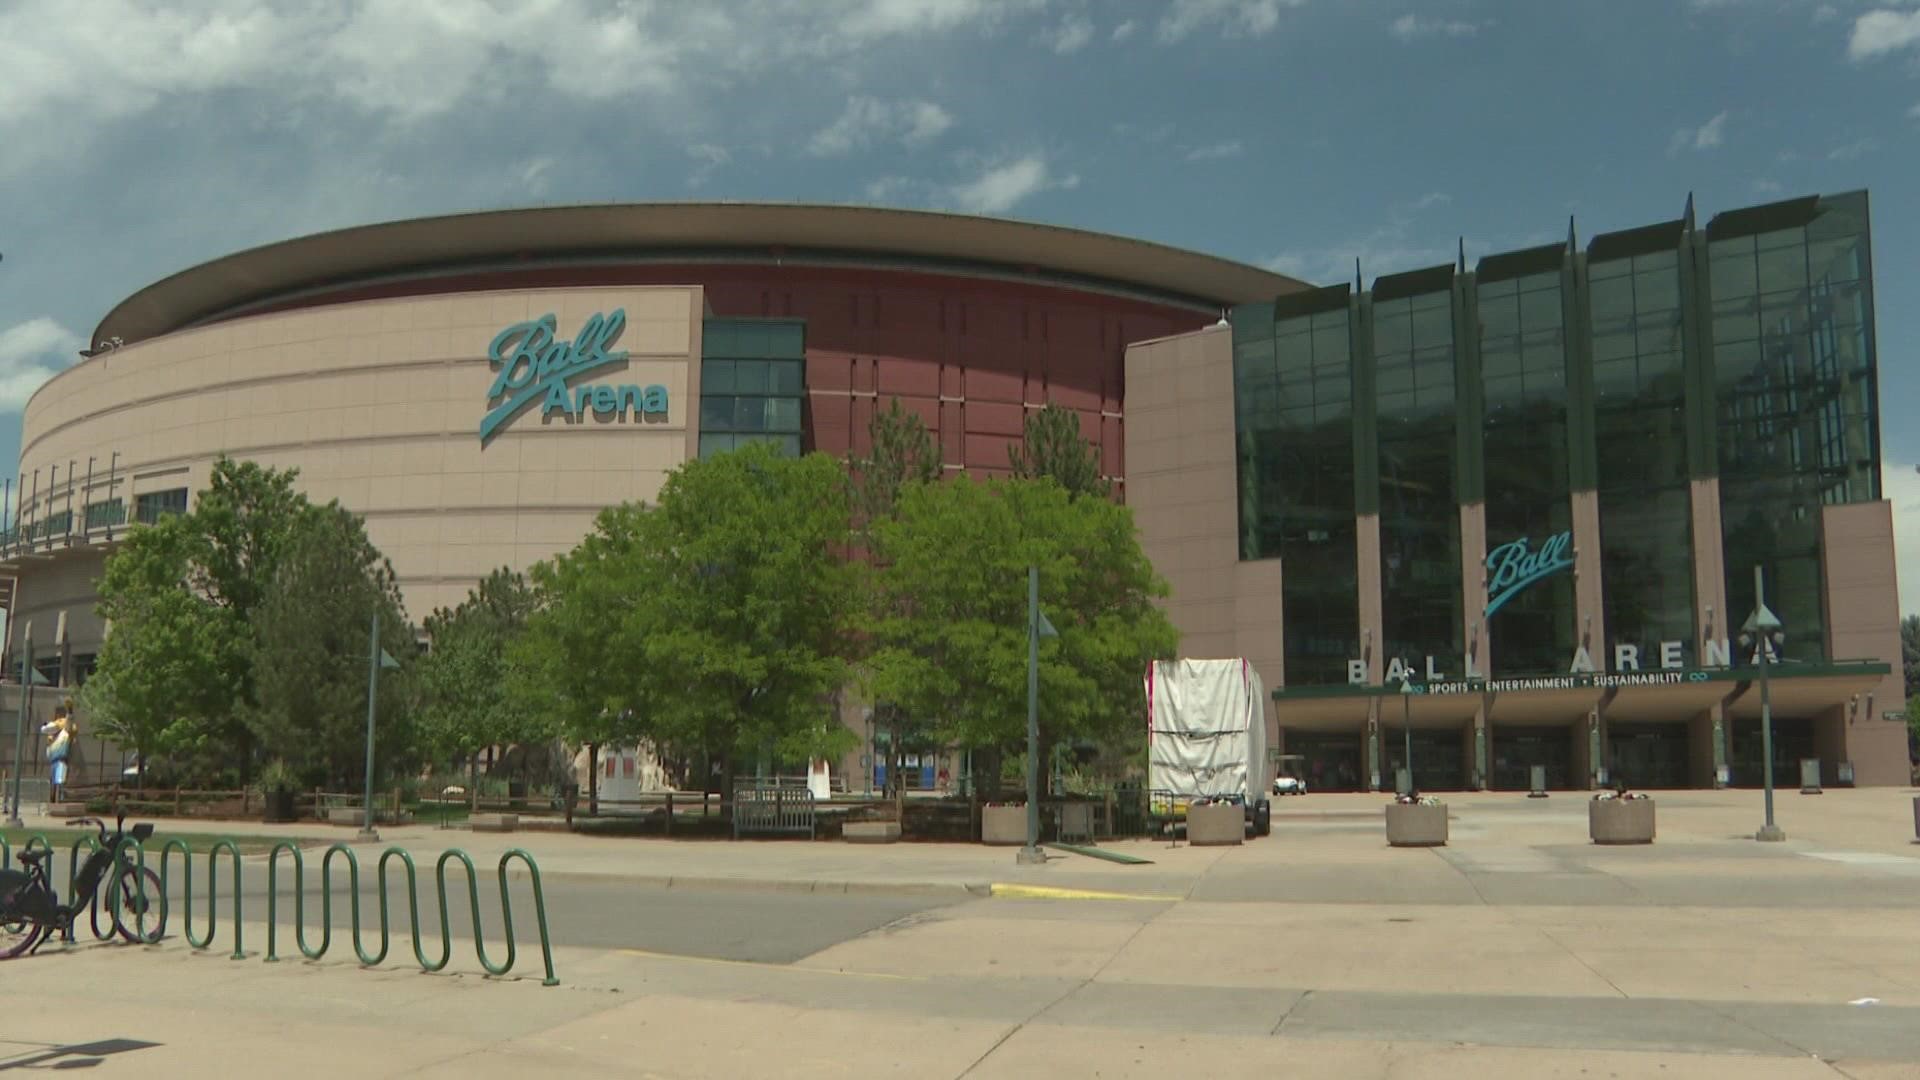 Colorado Avalanche Watch Parties Set To Hit Ball Arena